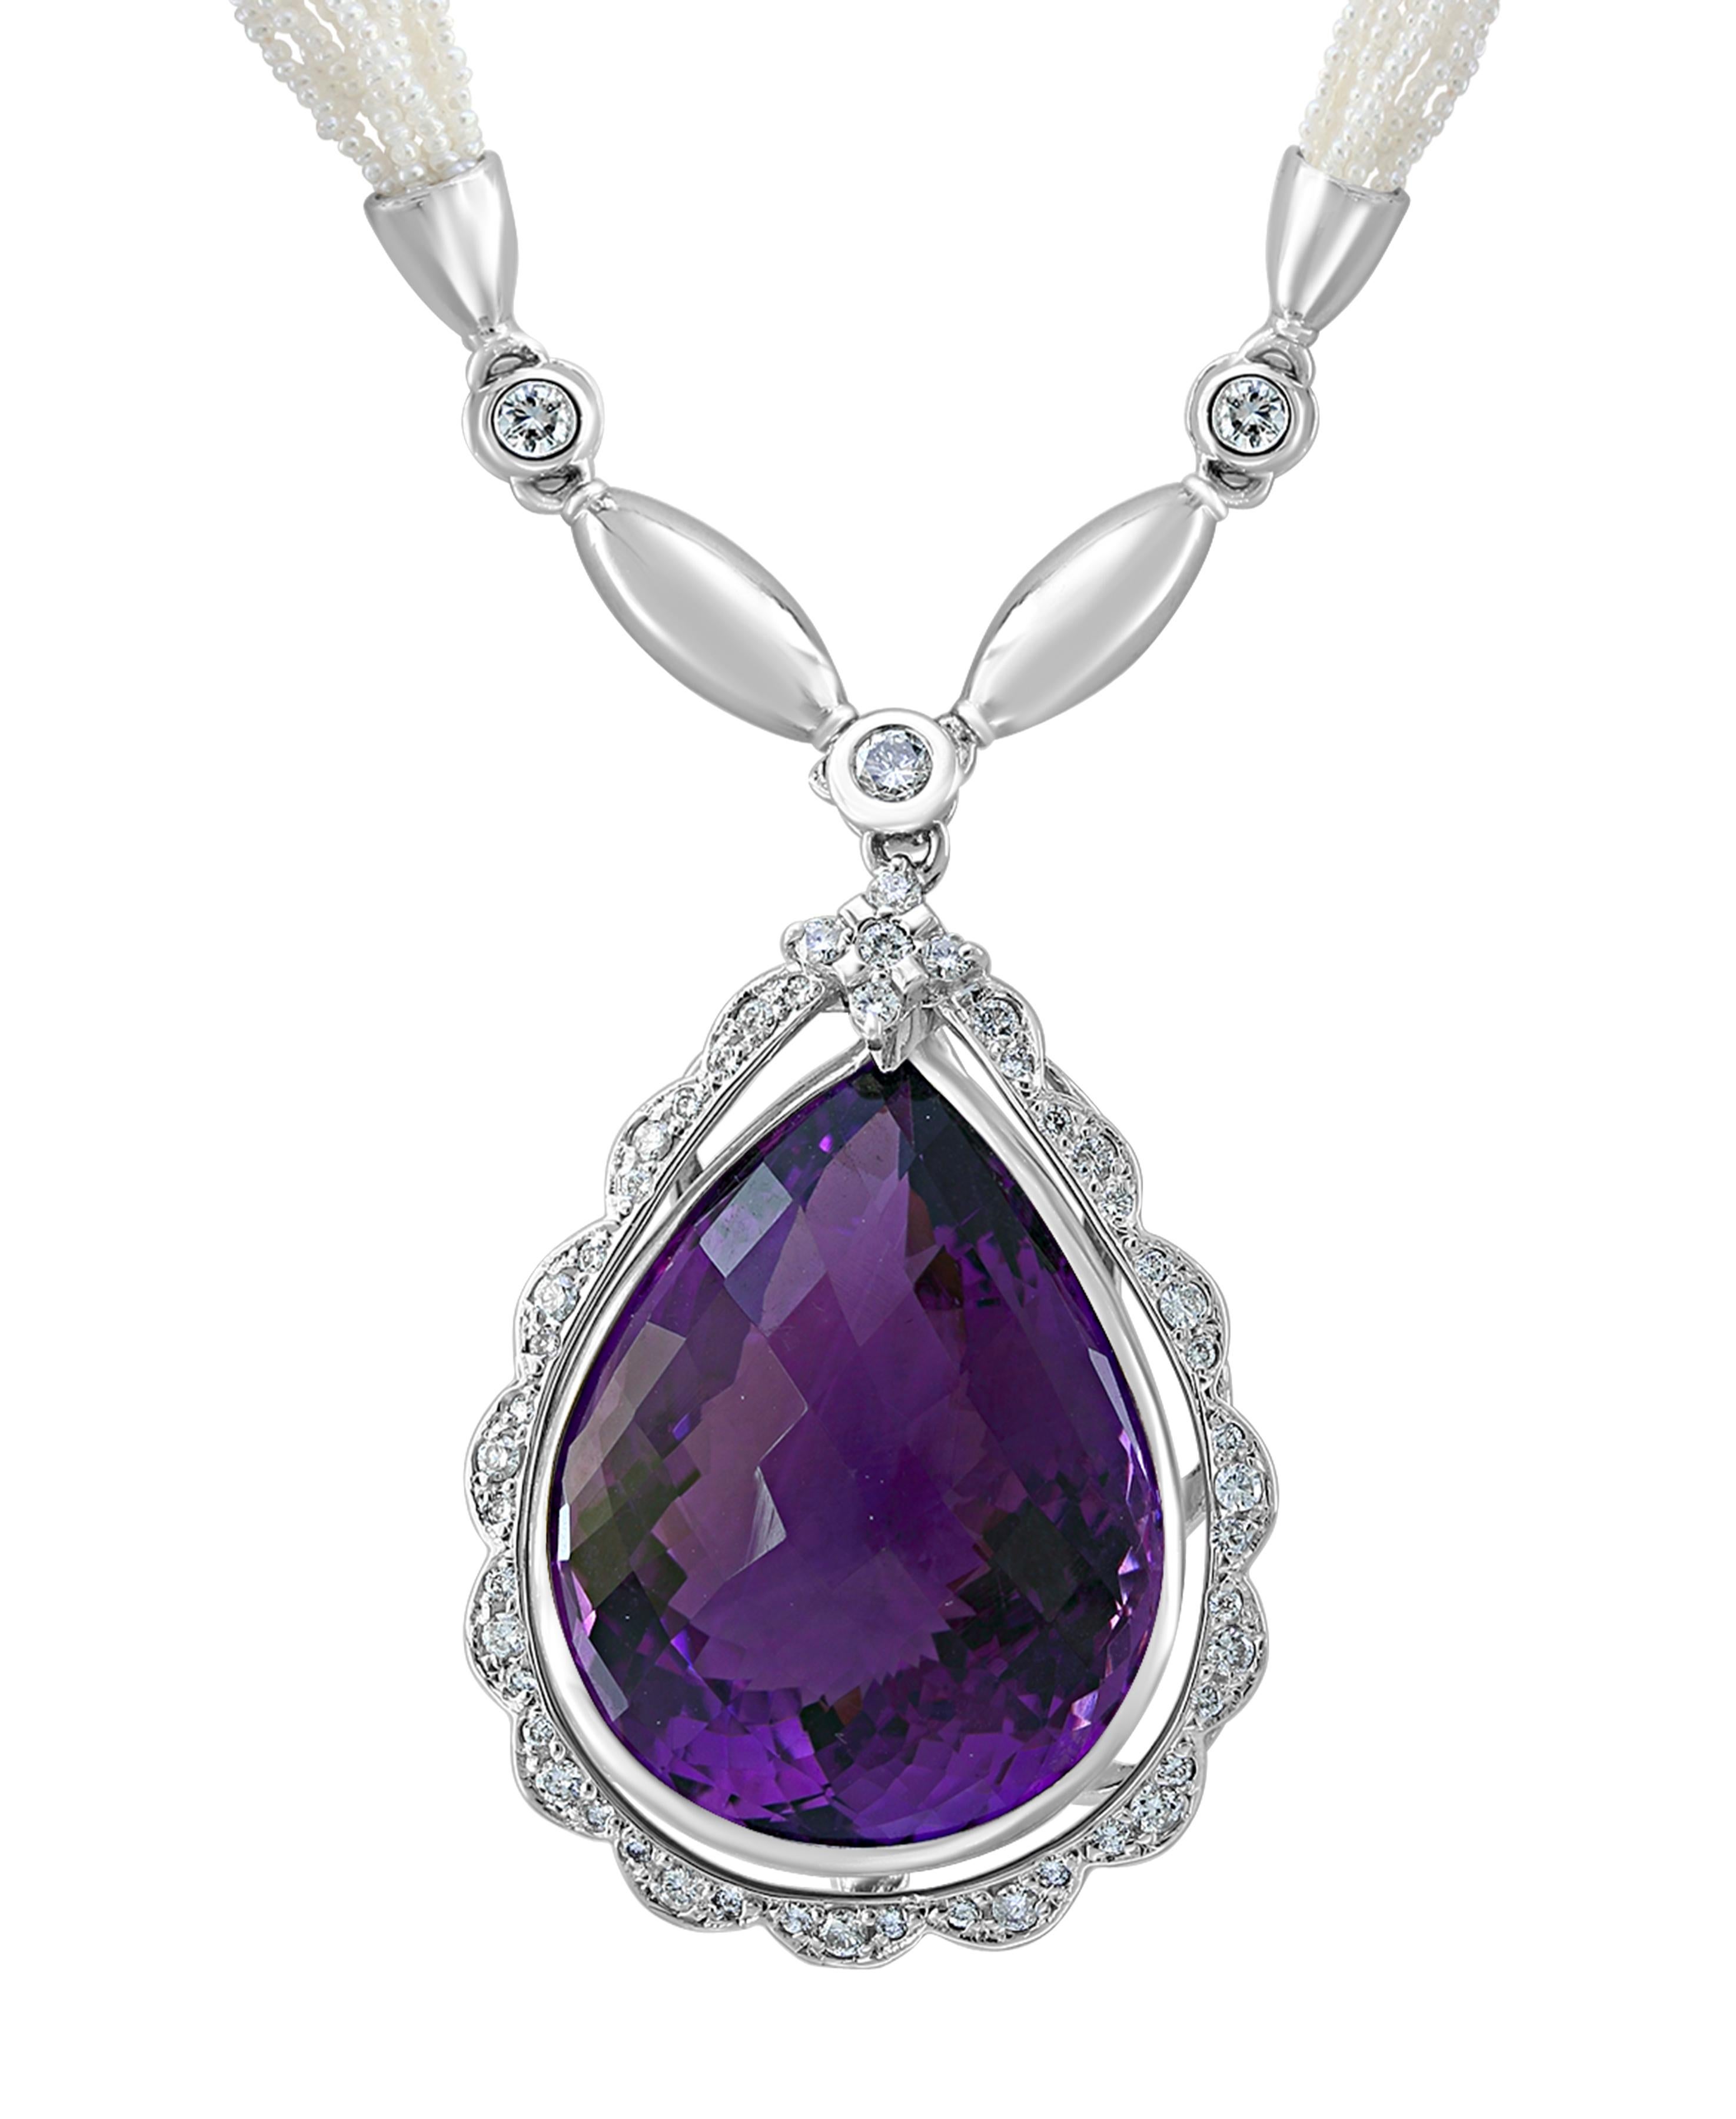 54 Carat  Tear Drop Amethyst & Diamonds with Seed Pearl Necklace  18 K Gold
18 K White Gold 
This extraordinary Necklace is consist  of  Fine  large 54.5 carats Tear Drop natural  Amethyst 
This large Amethyst pendulam is hanging from very tiny seed